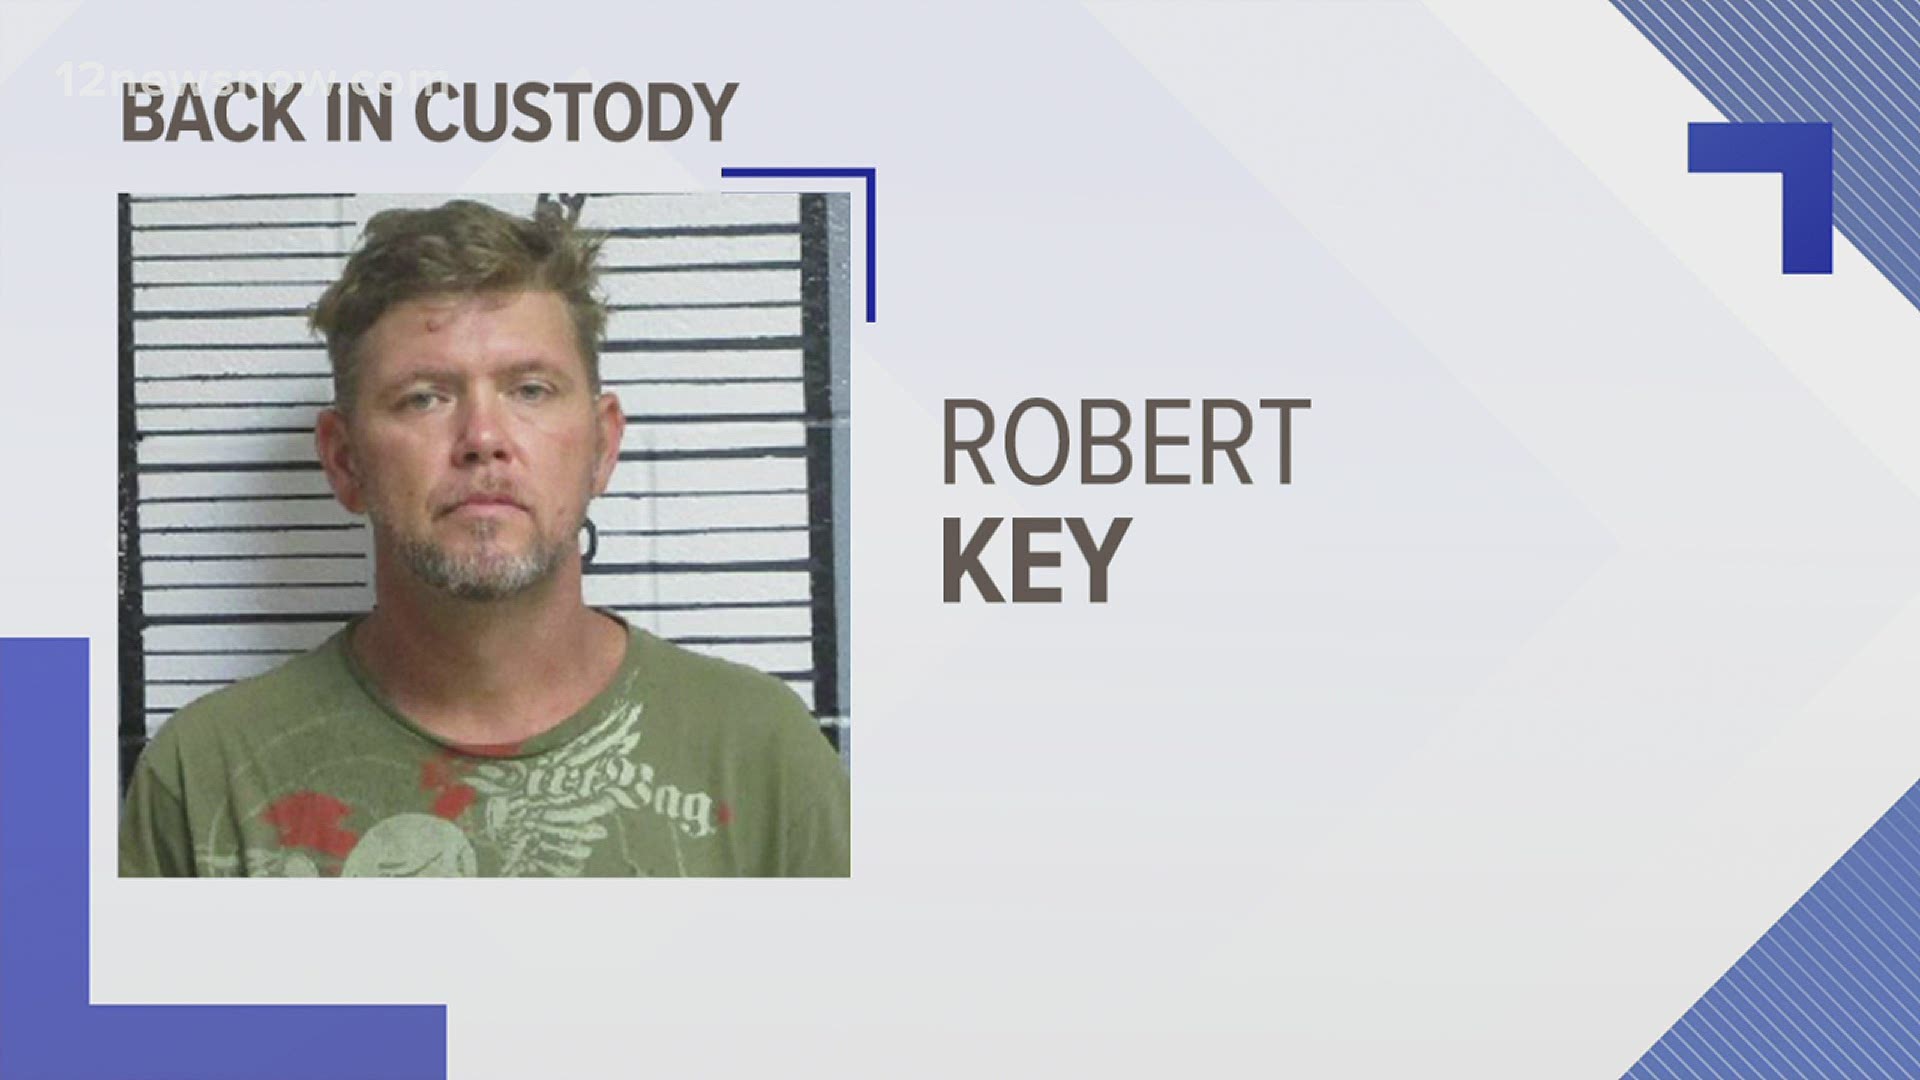 Robert Key was arrested in Angelina County